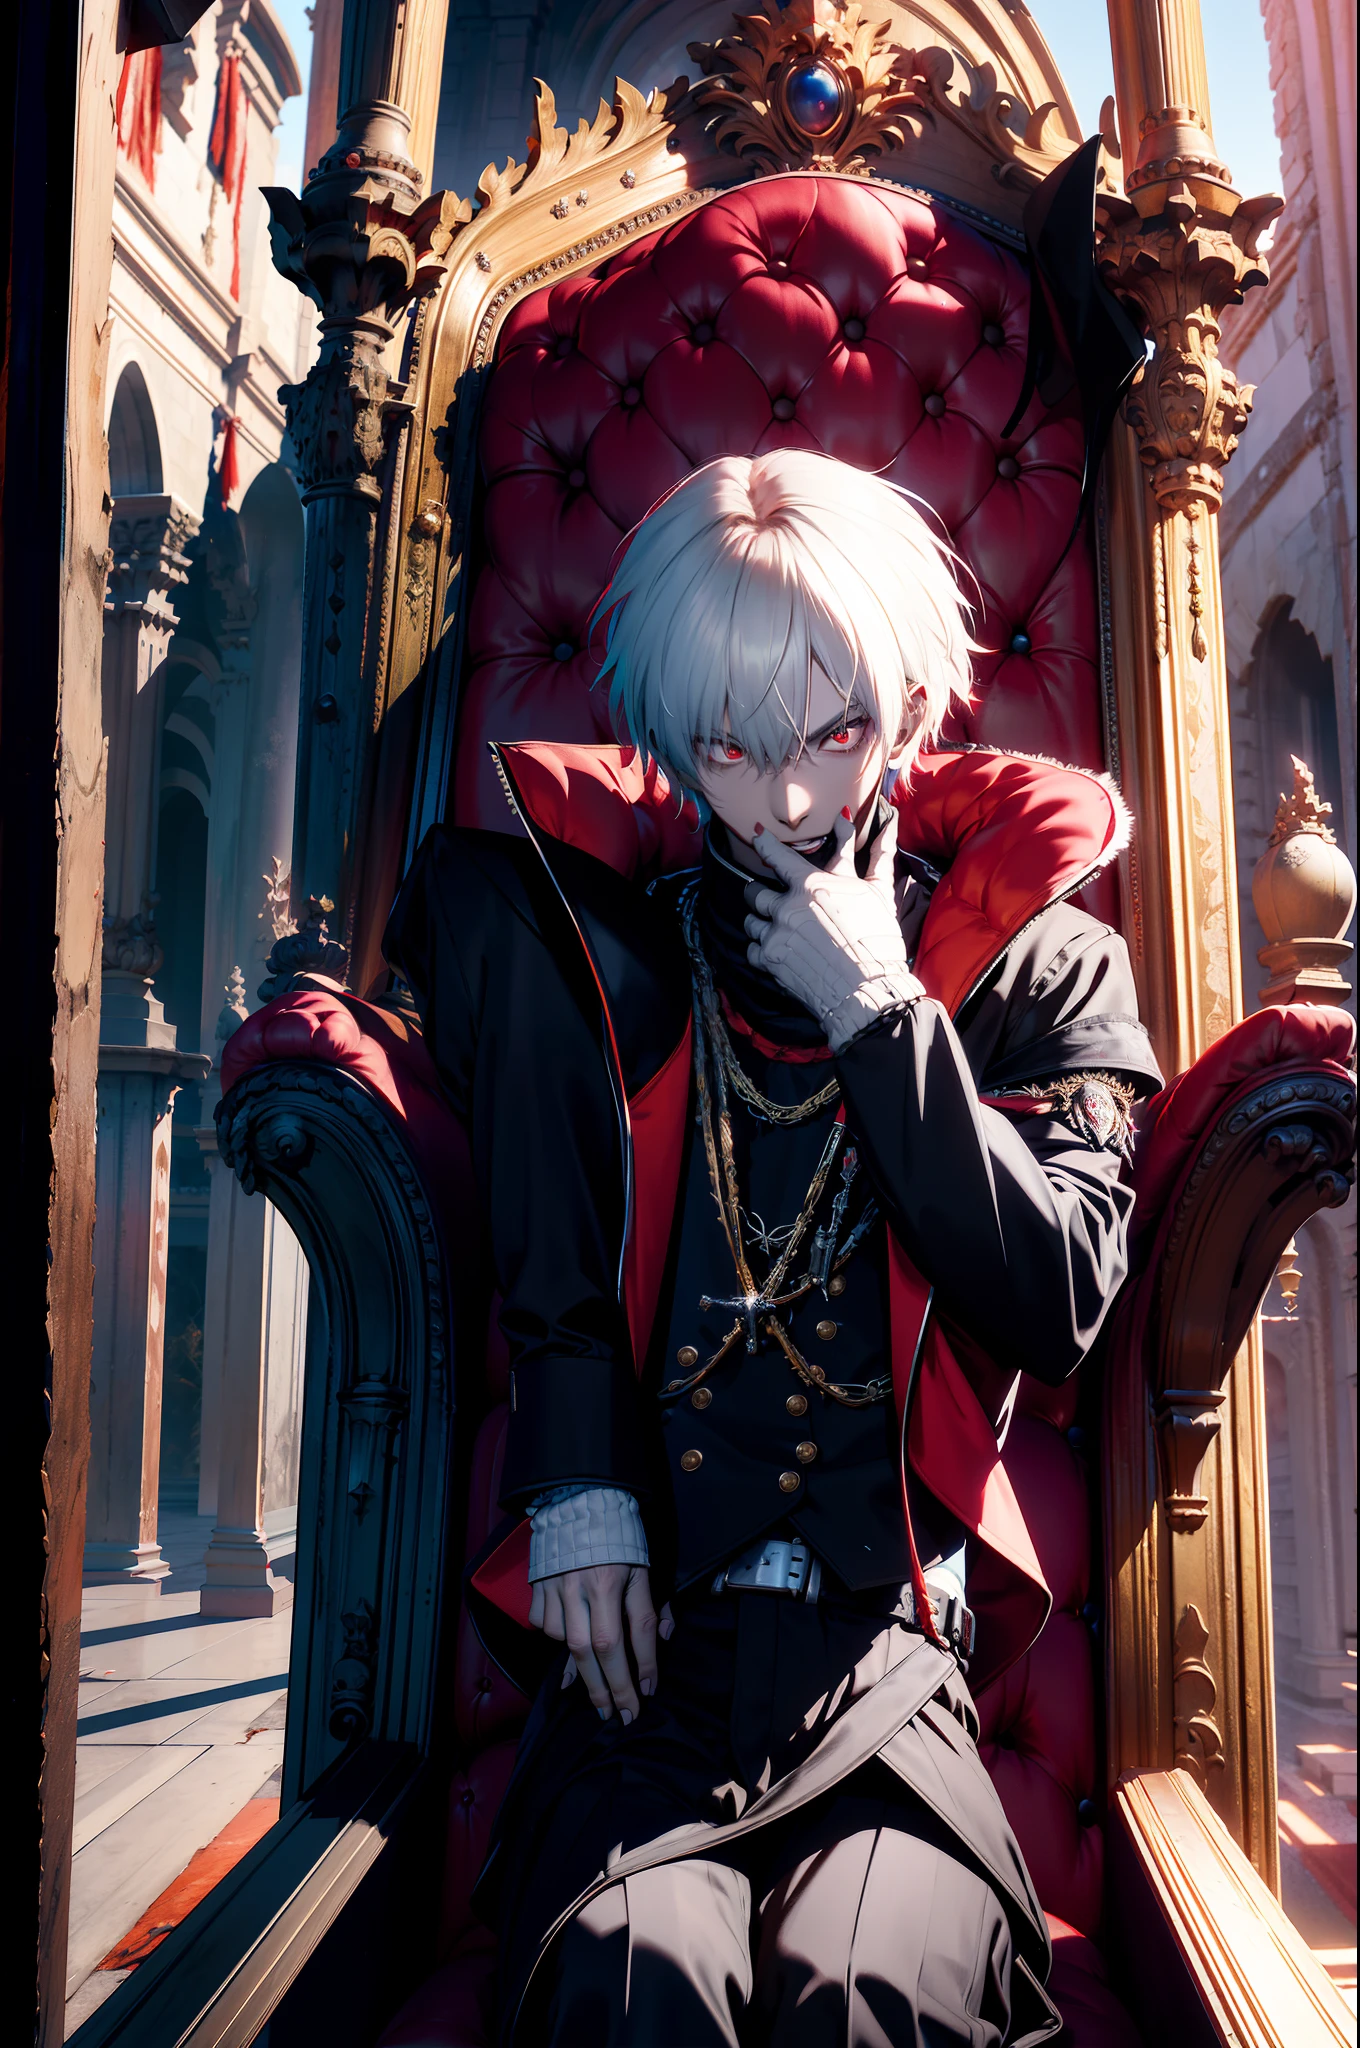 A white-haired, red-eyed prince sits on a majestic throne inside an abandoned palace. The environment around him is dark and gloomy, with evil red eyes in the walls and cobwebs hanging there. The throne is ornate, with details in gold and precious stones, and is covered by a dusty cloth. The protagonist is wearing royal clothing, with a kaneki expression on his face, as he stares at the horizon with glowing red eyes, masterpiece, best quality, ultra-detailed, illustration, 8k resolution concept art, fantasy art, epic art, concept art wallpaper 4k, deep color, natural lighting